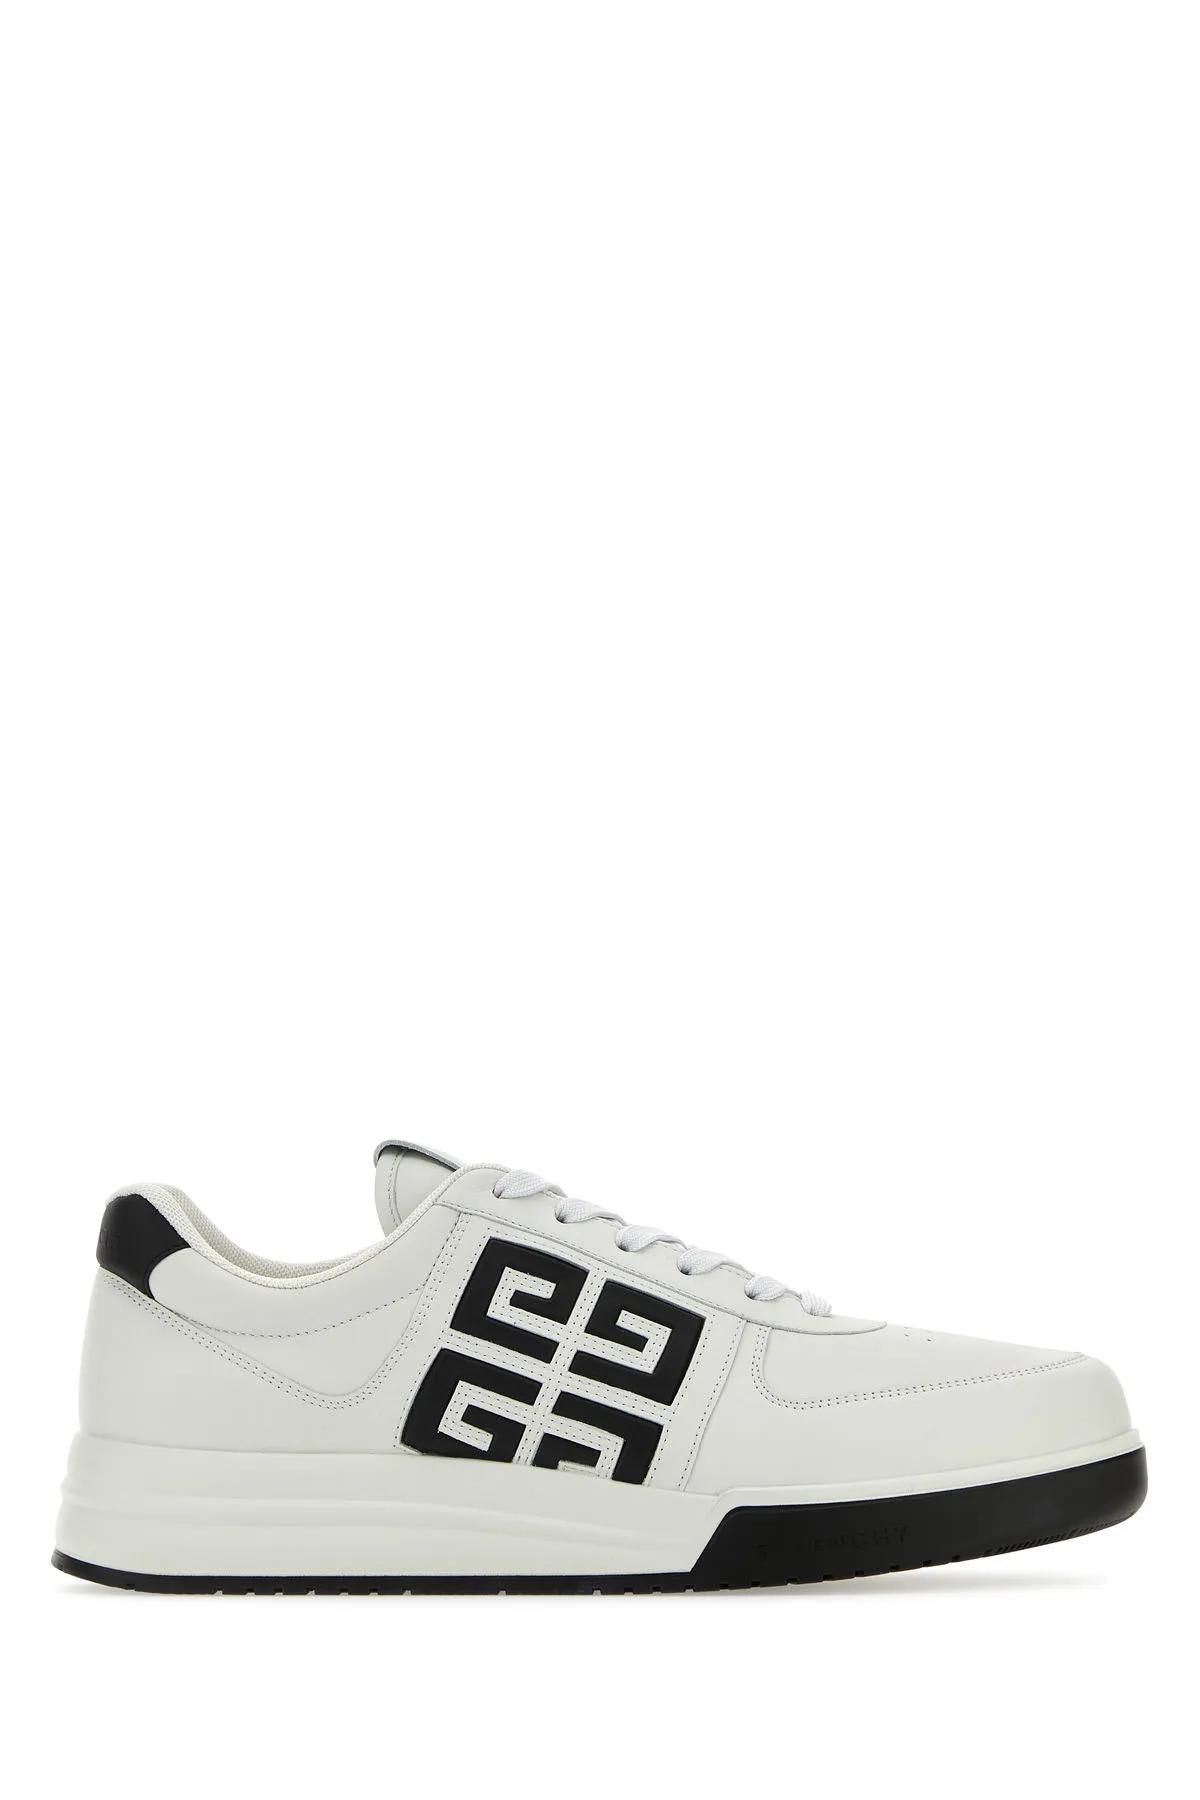 Givenchy Two-tone Leather G4 Sneakers In White